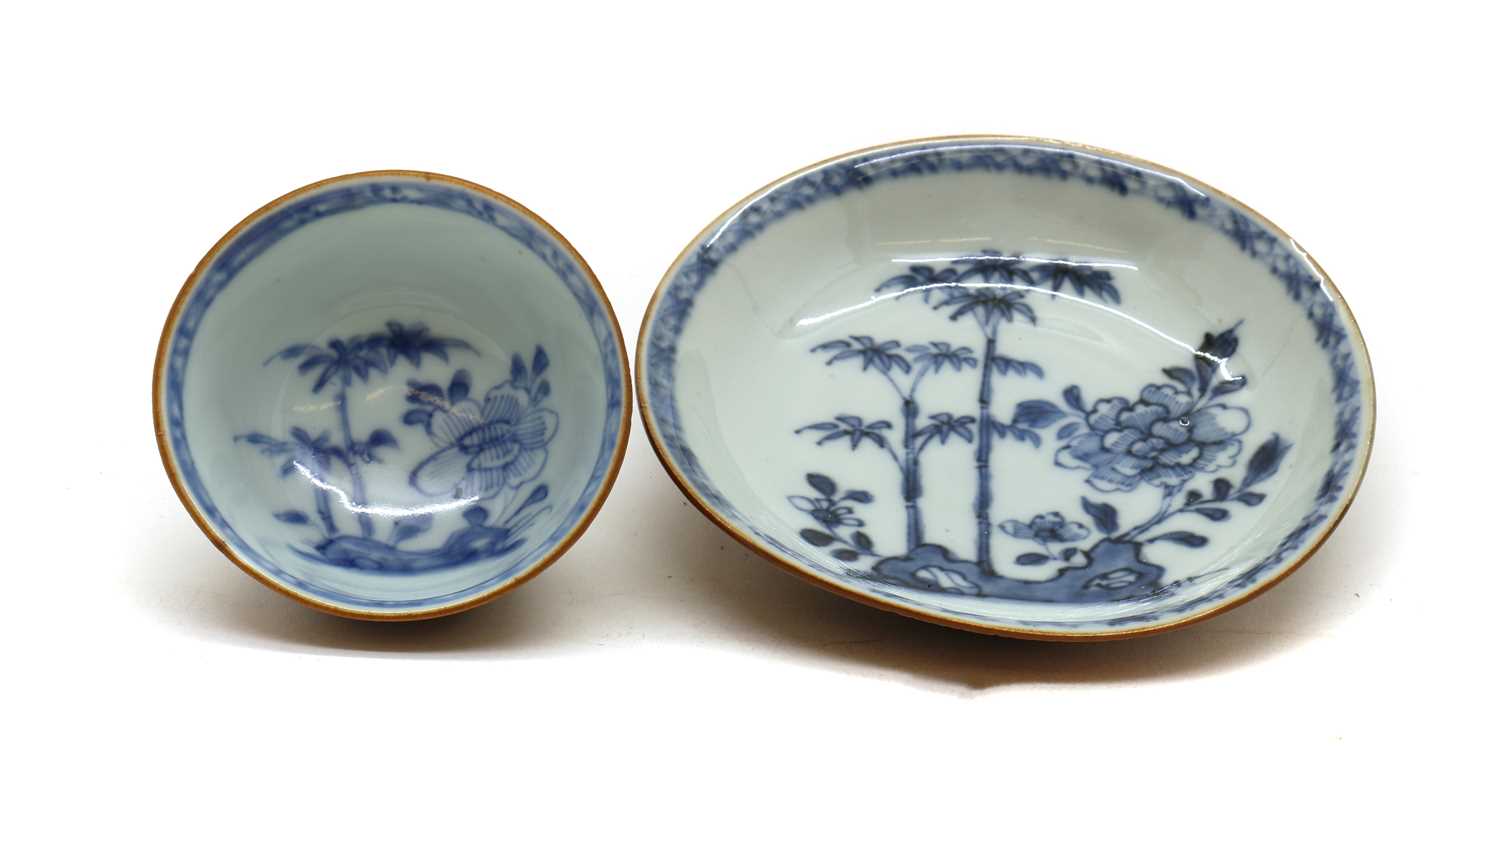 A Chinese Nanking Cargo blue and white porcelain tea bowl and saucer, - Image 3 of 4